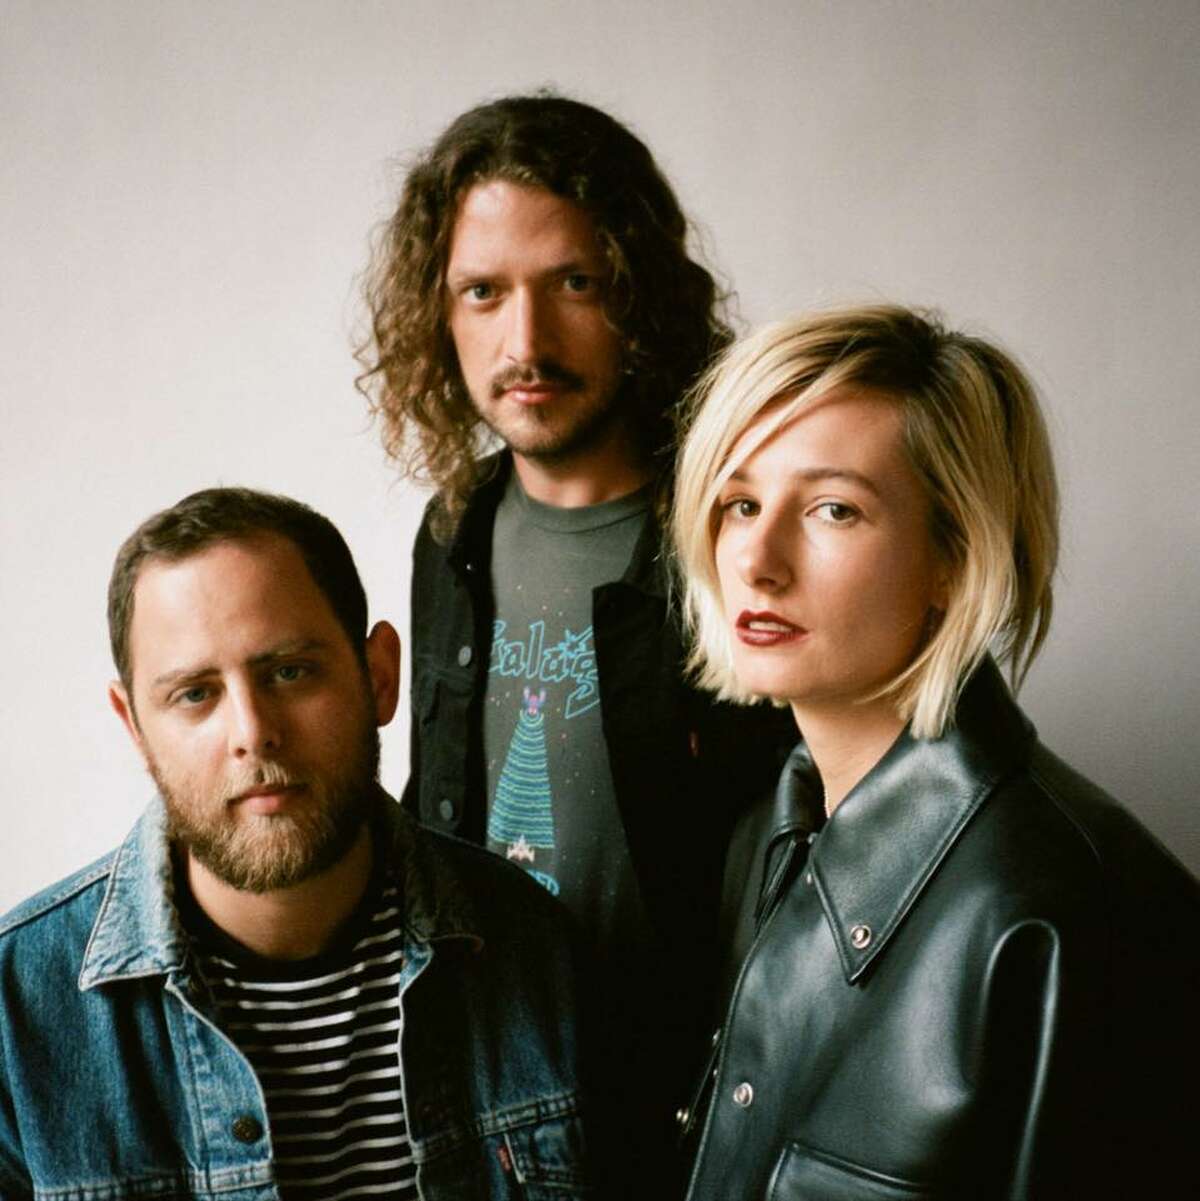 Slothrust performs Sunday at Jupiter Hall. Read our spotlight on the band. Get tickets.